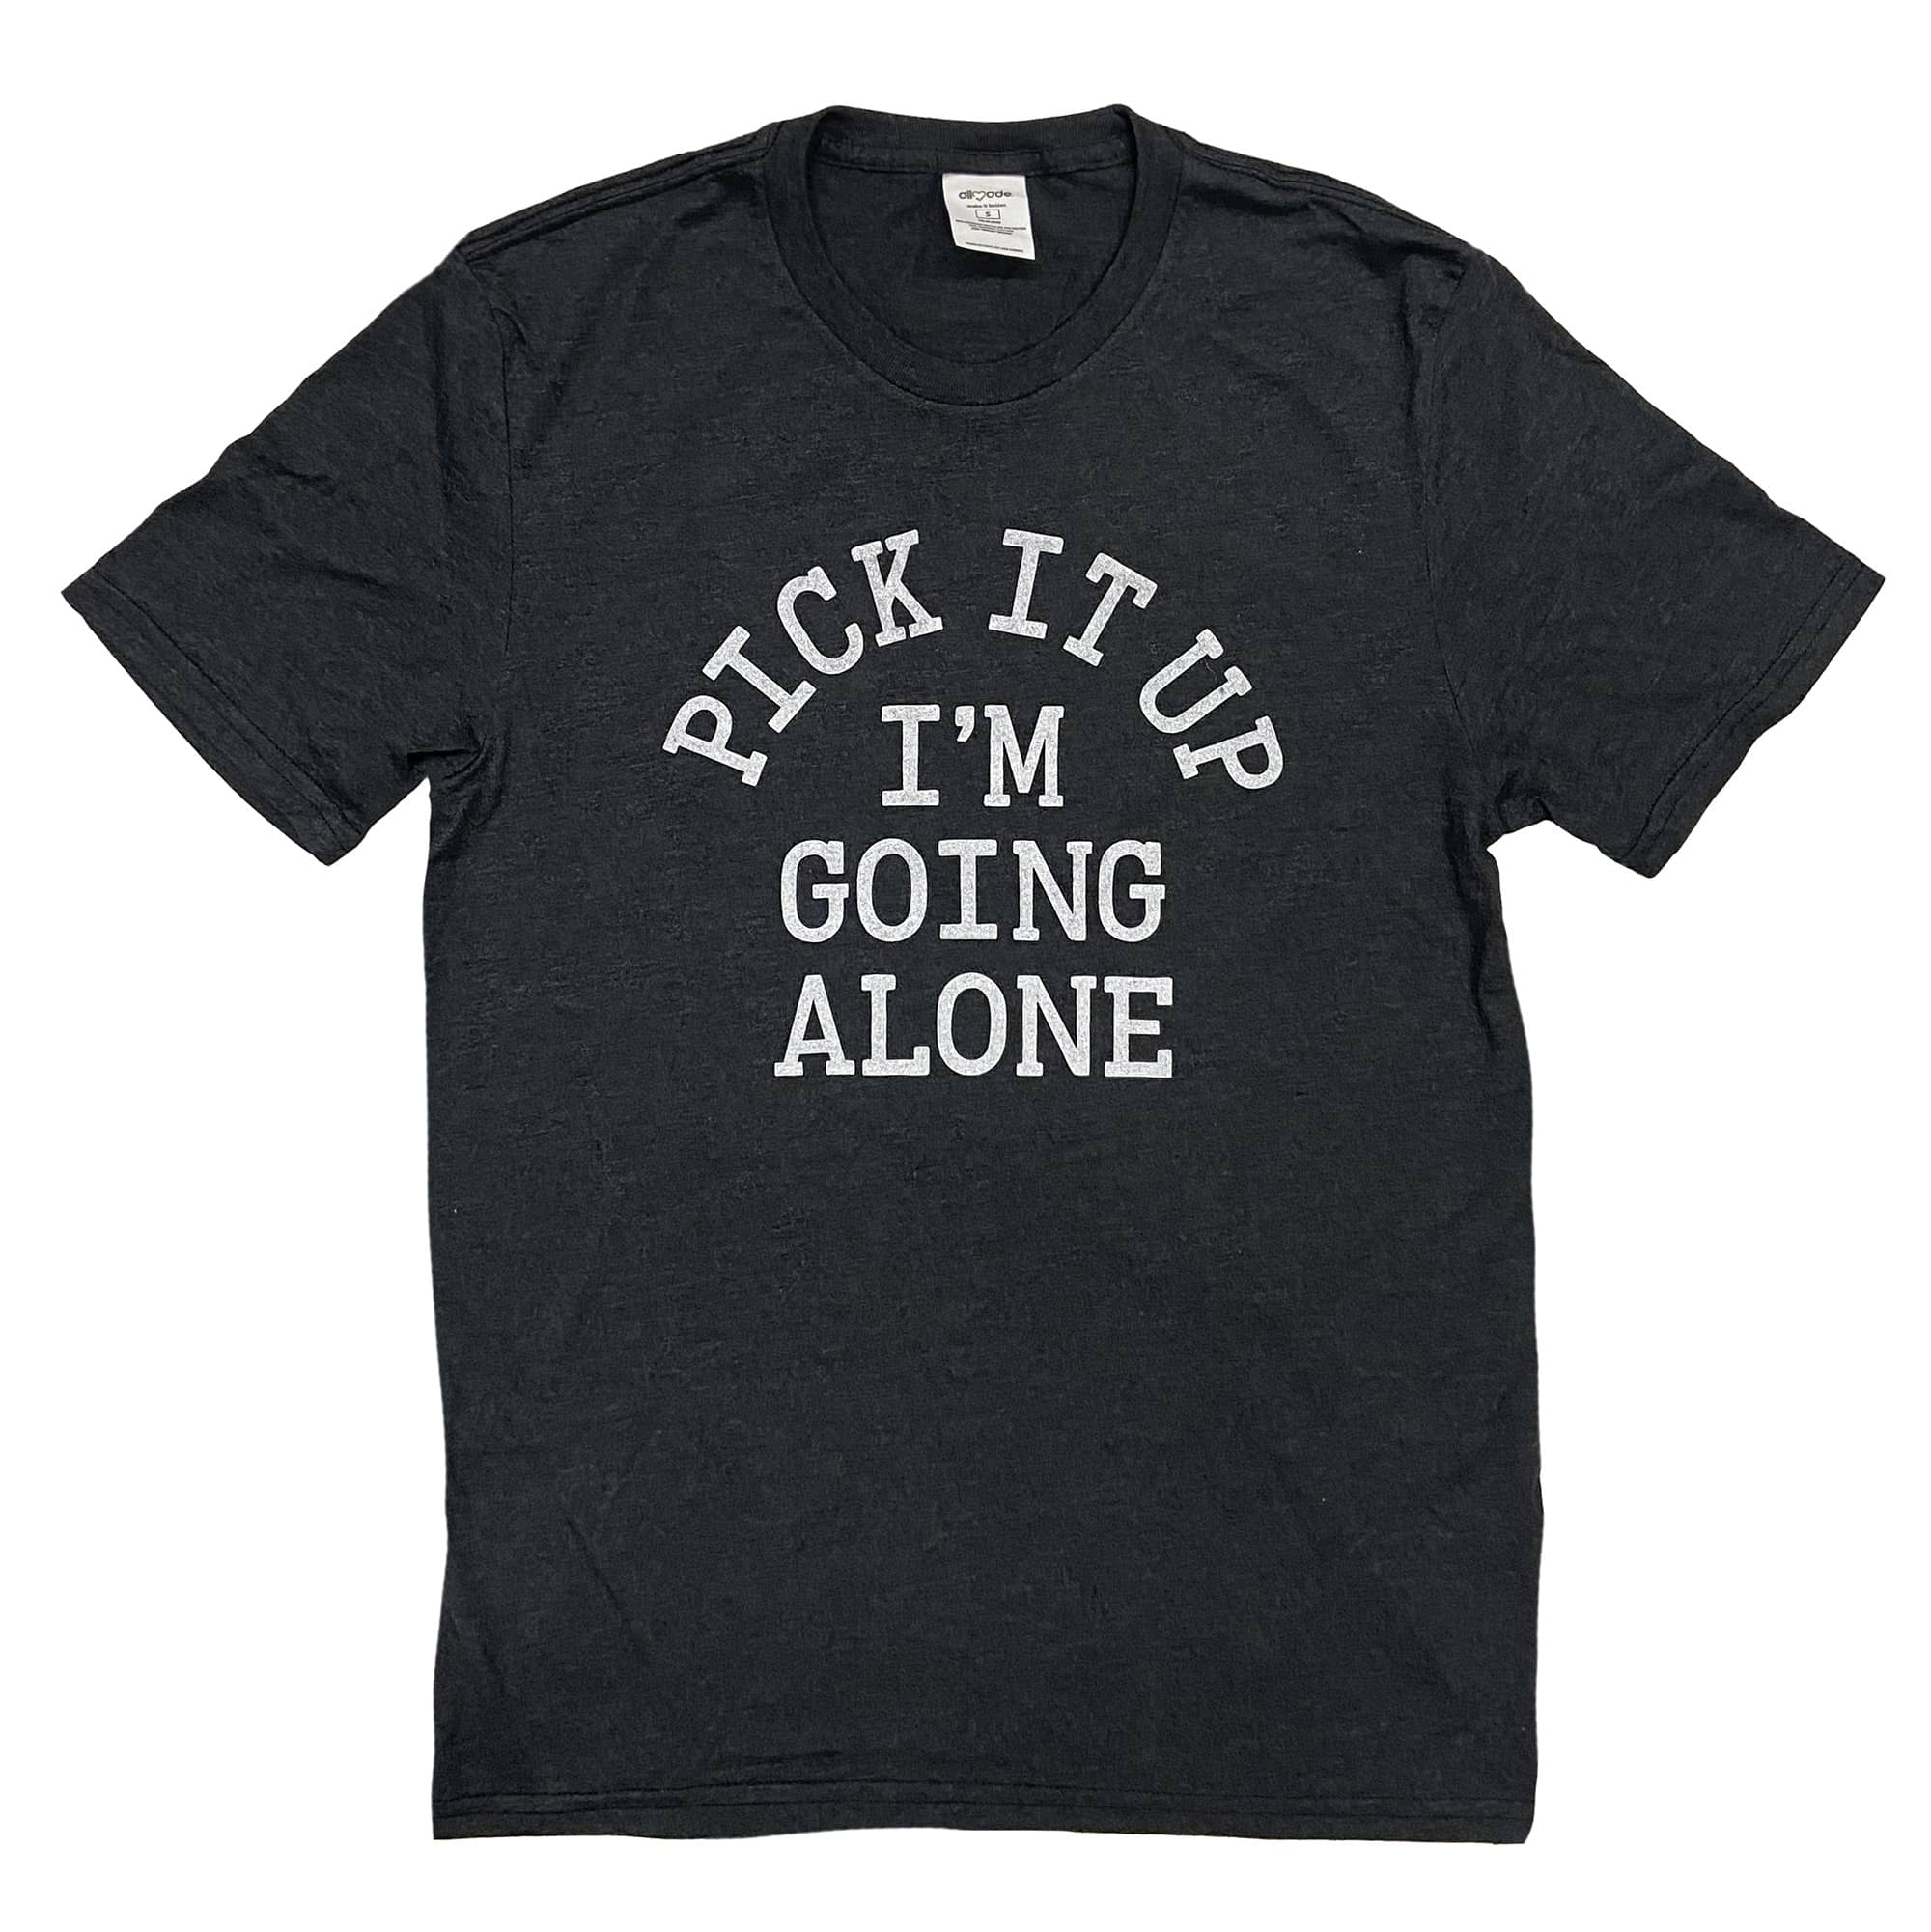 Short sleeved black heather t-shirt with "Pick It Up" arched over the words "I'm going alone" in cream ink.